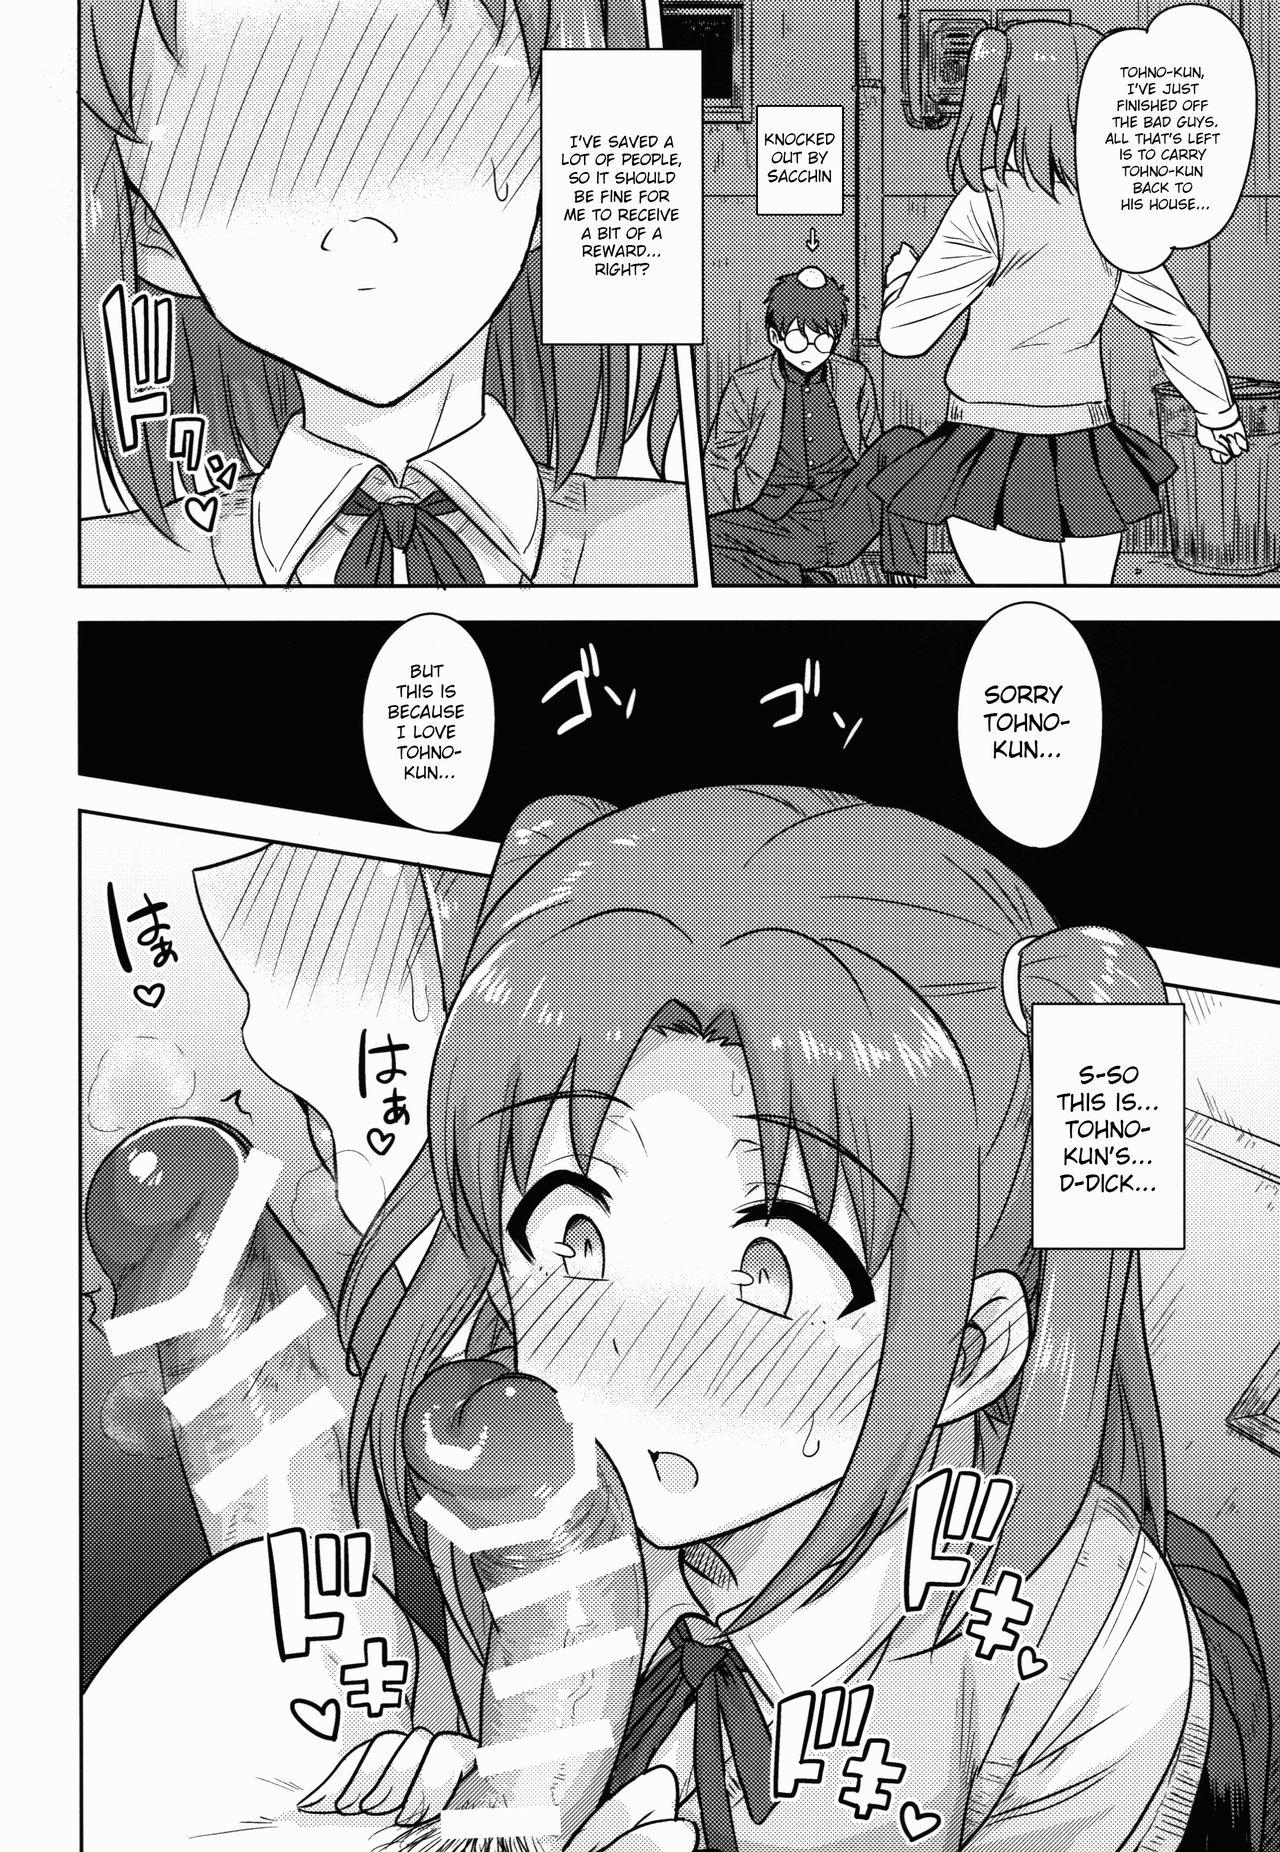 Lez Aru Hi no Futari MelBlo Hen | A Certain Day with Each Other Melty Blood Hen - Tsukihime Hot Fuck - Page 9